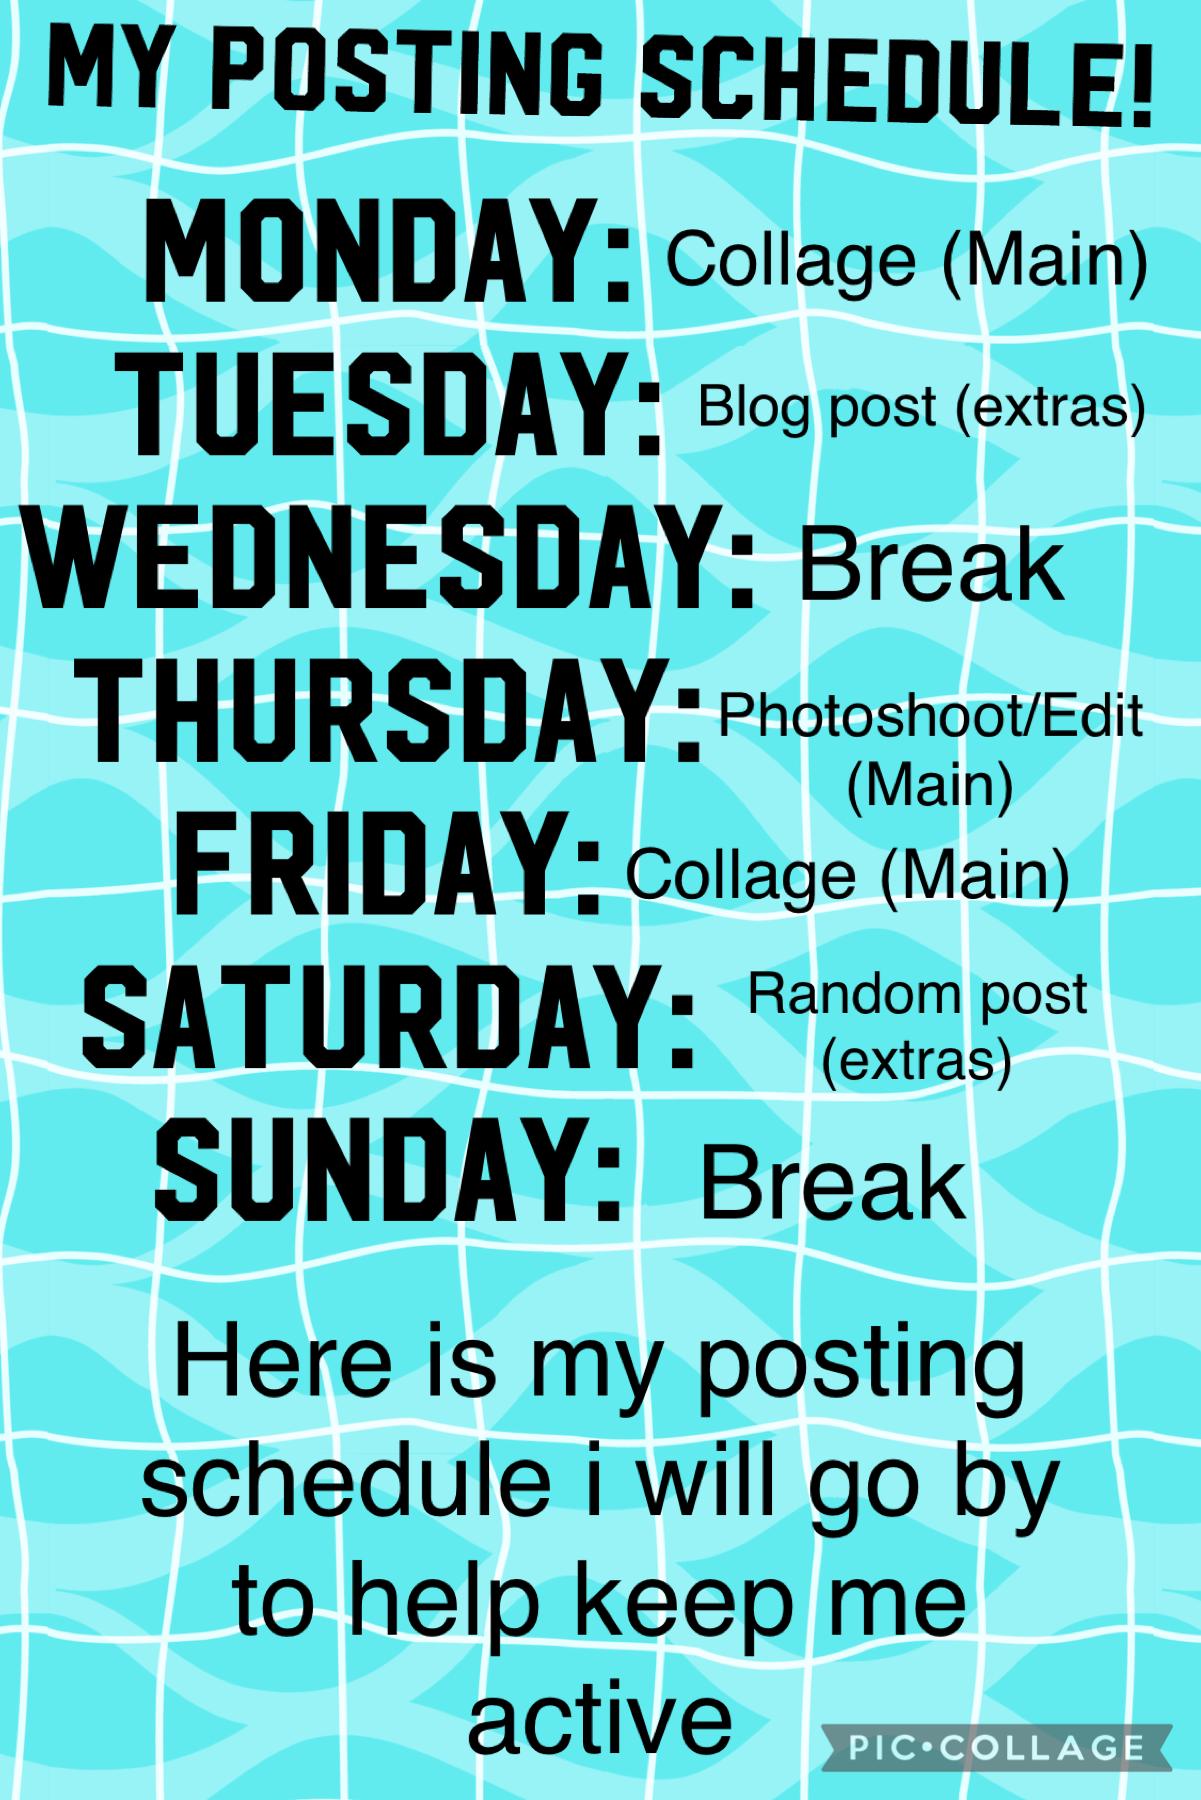 🤪TAP🤪
Here is my posting schedule. This will go into effect tomorrow, Monday (8/9/21). Please make sure you share that I am coming back and check out my other accounts 
@-rainbow-waves-
@-rainbow-waves-extras-